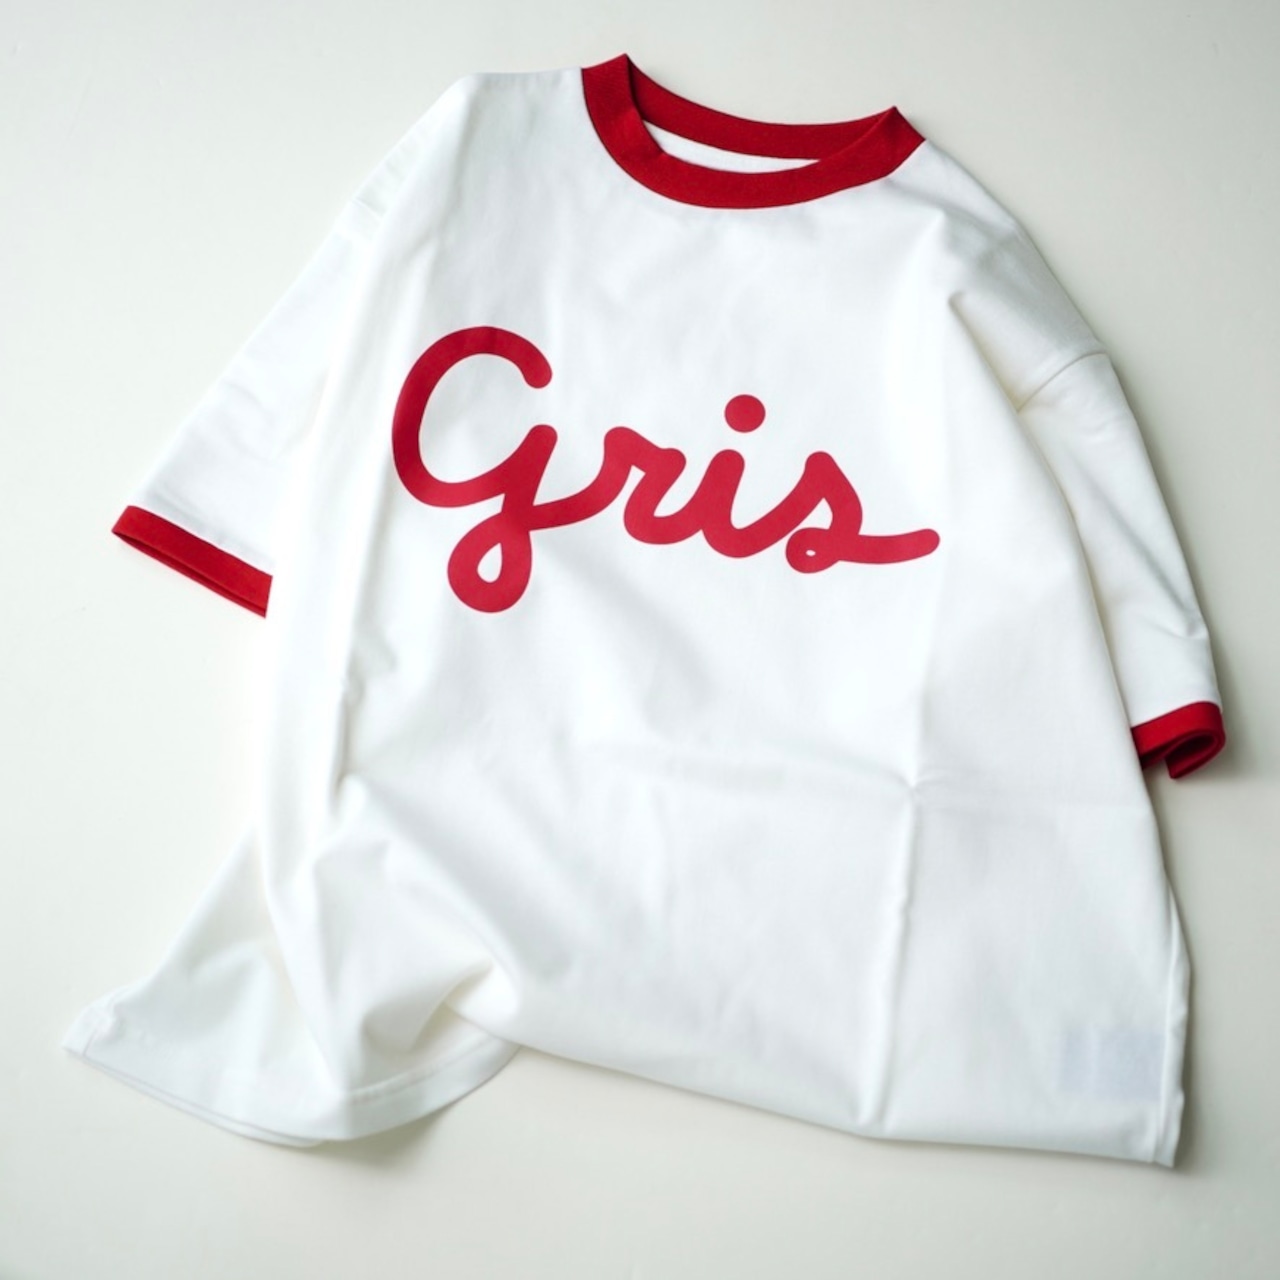 〈 GRIS 24SS 〉 Ringer Tee "Tシャツ" / White / size L&XL